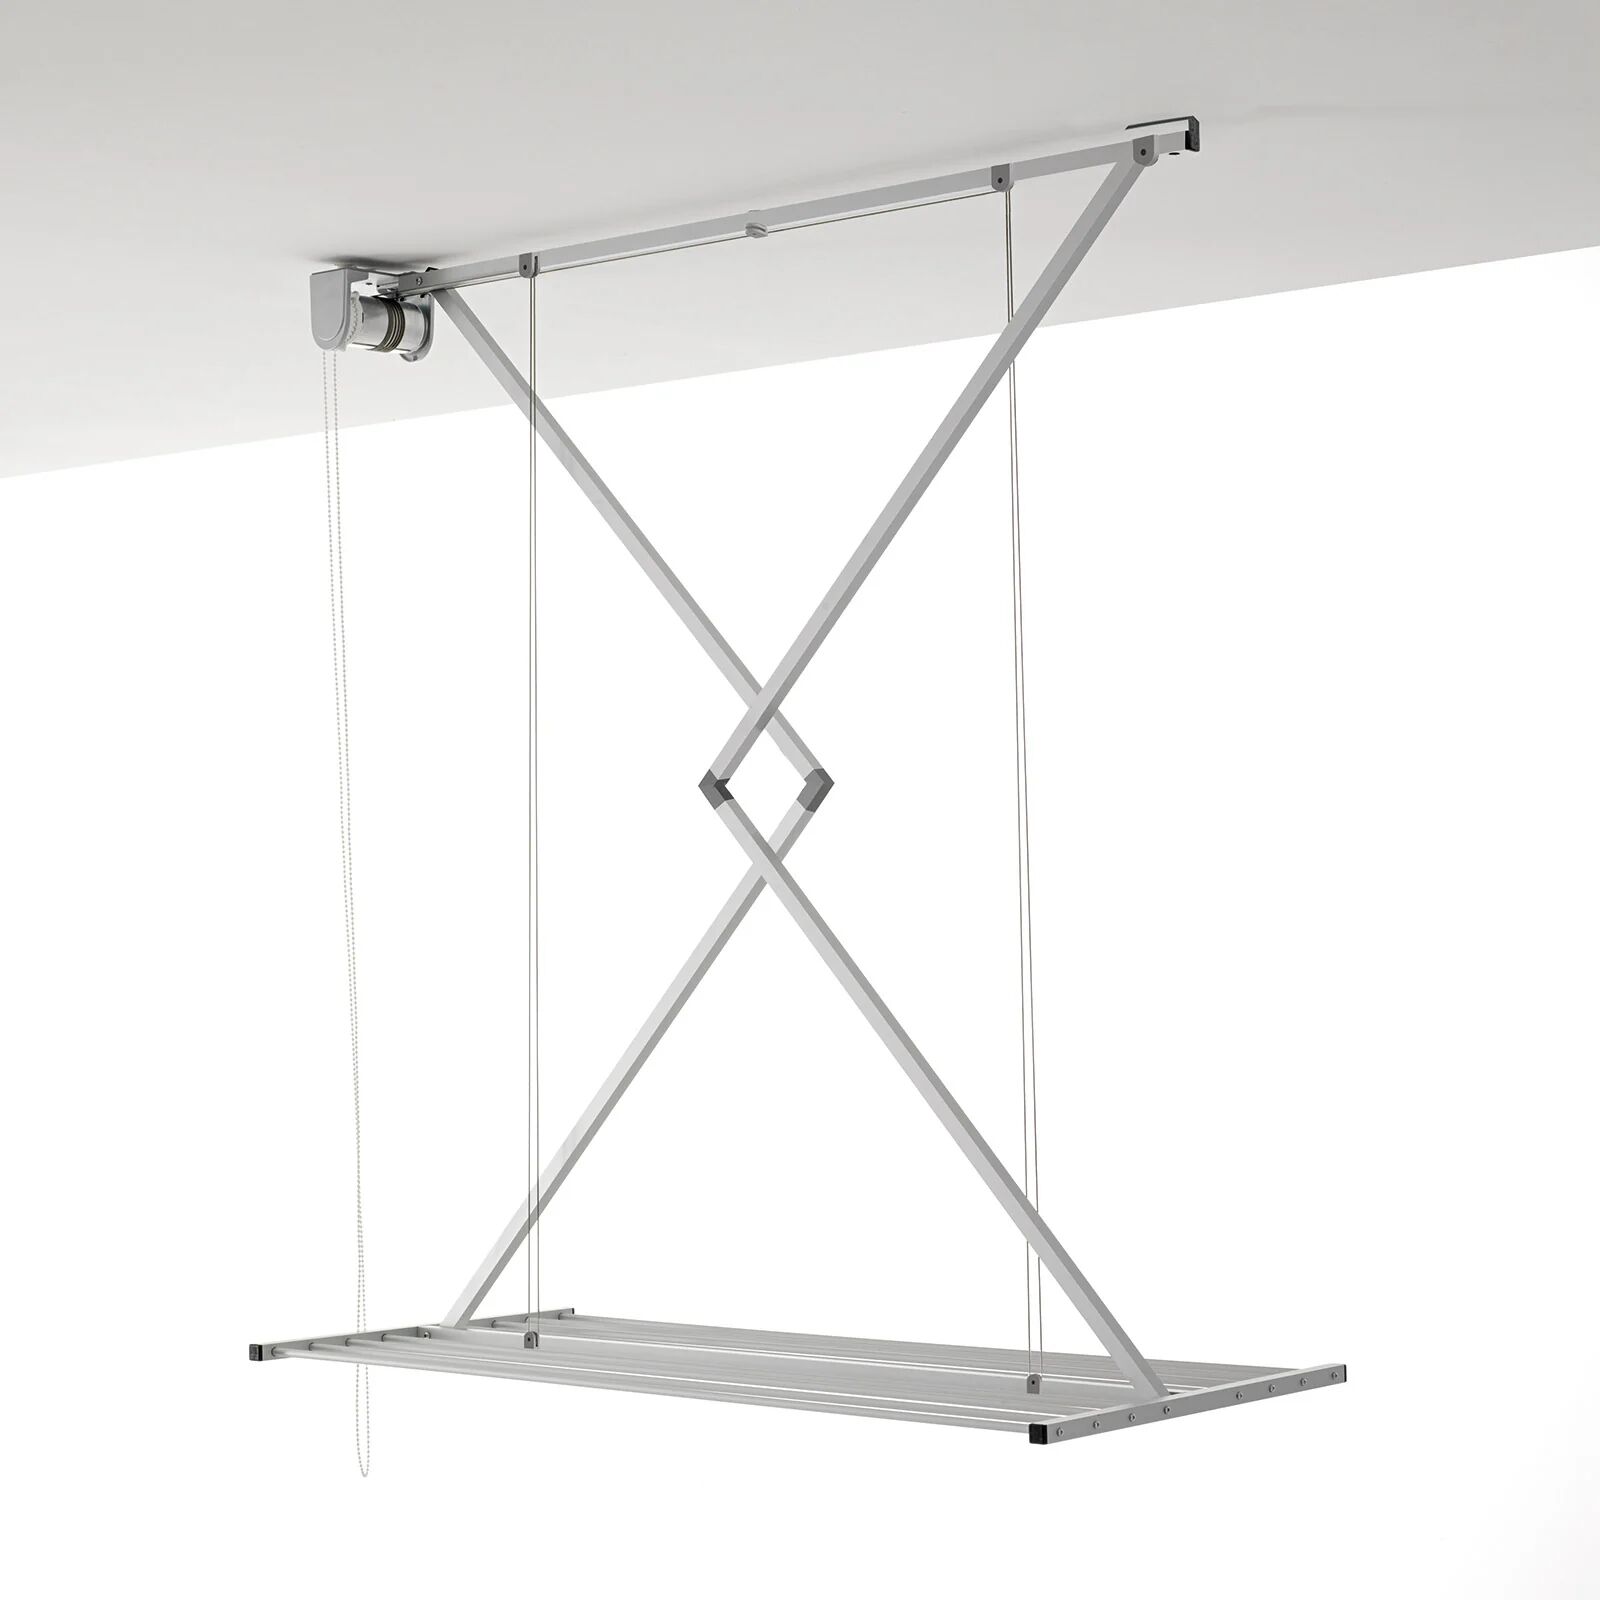 Foxydry Mini 150 ceiling-mounted drying rack manual clothes